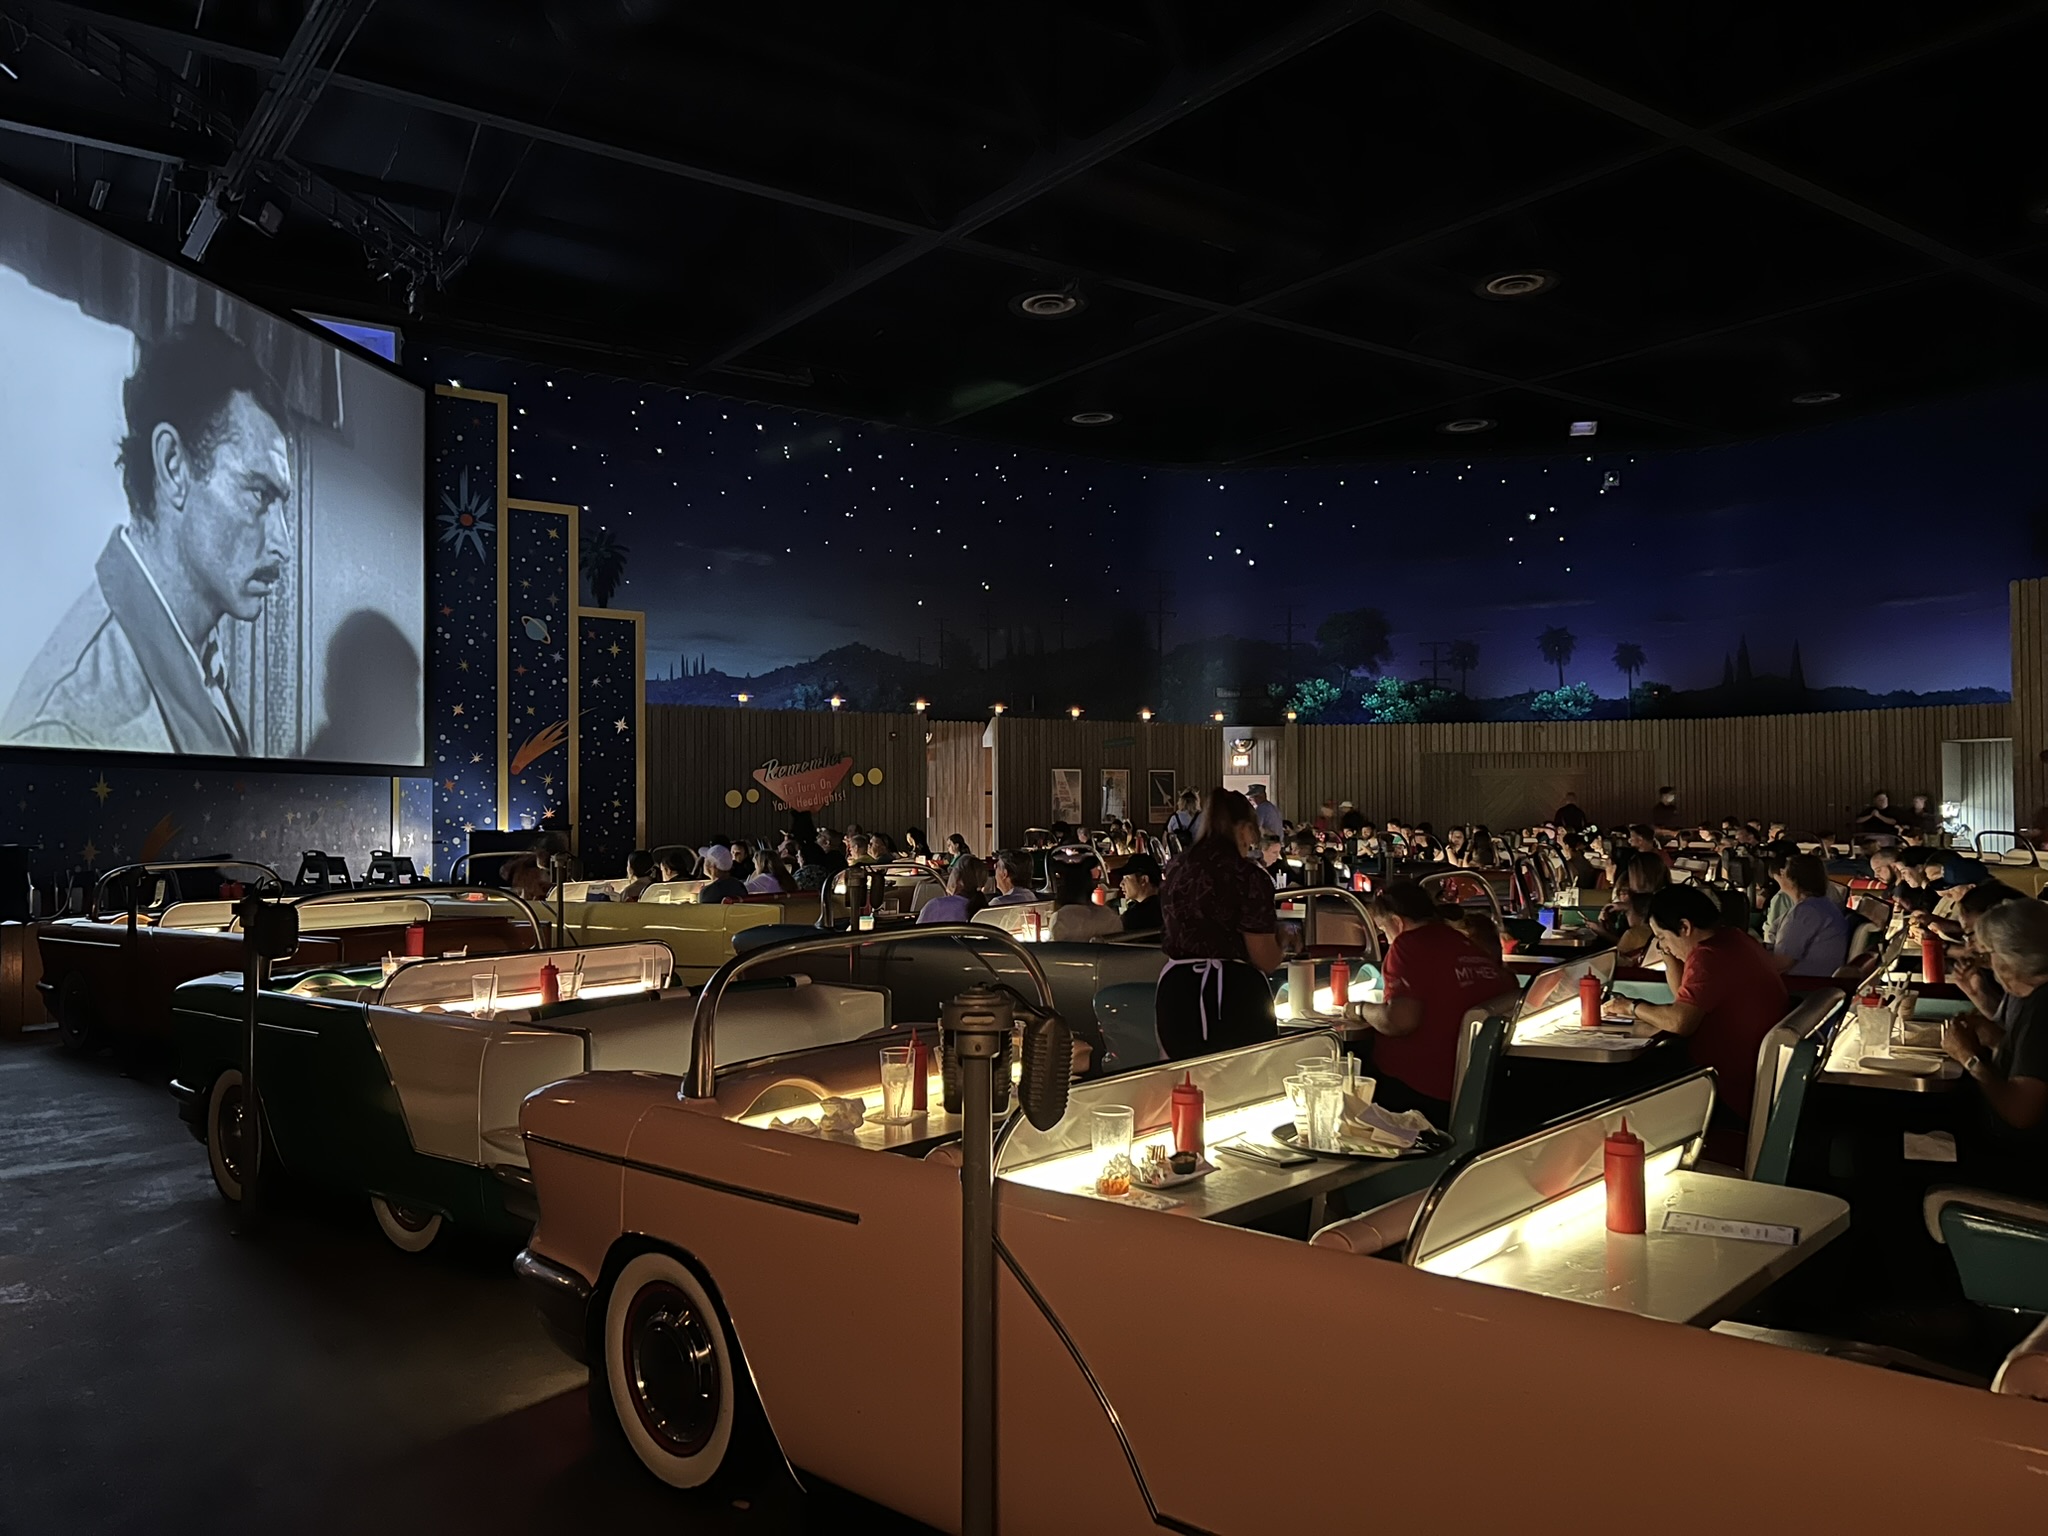 Theme Park Dining Reviews – Disney Studios Sci-fi Dine-in Theater Dining Review at Walt Disney World